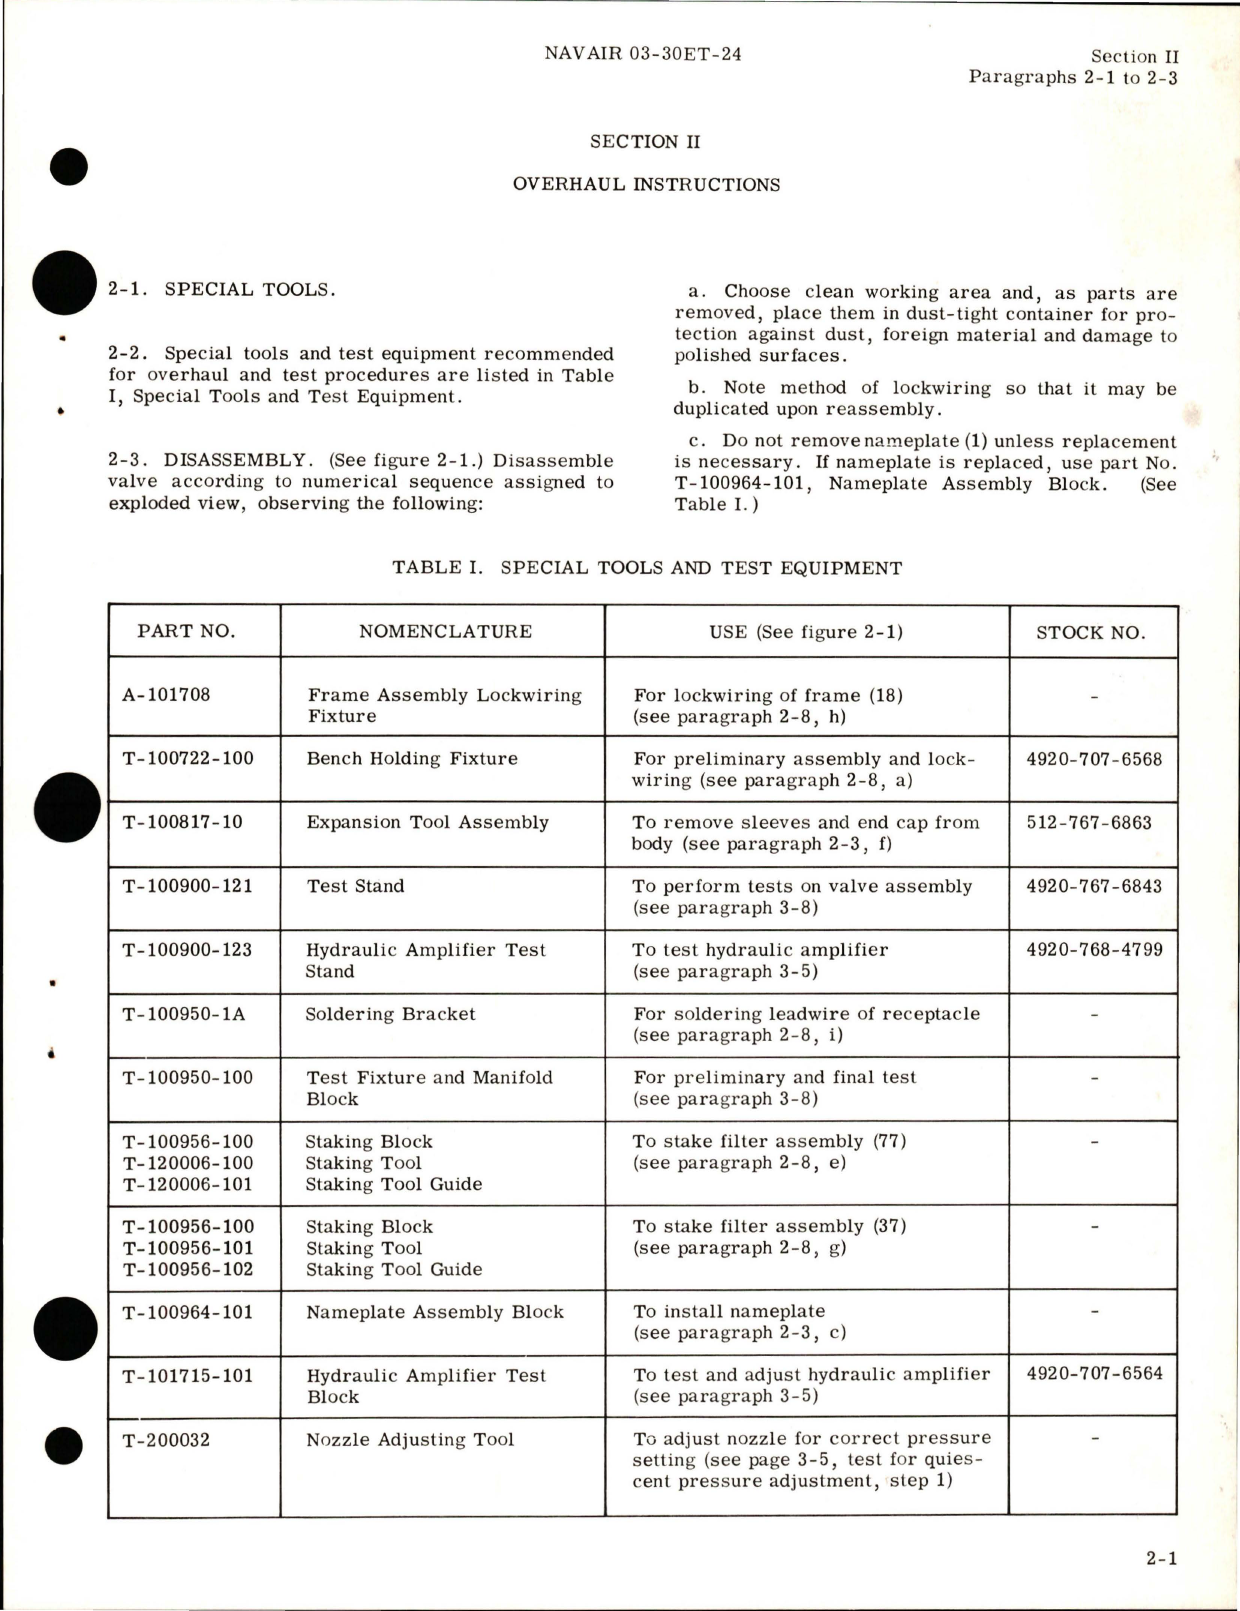 Sample page 7 from AirCorps Library document: Overhaul Instructions for Electro-Mechanical Input Hydraulic Servo Control Valve Assembly - Part 100950-1